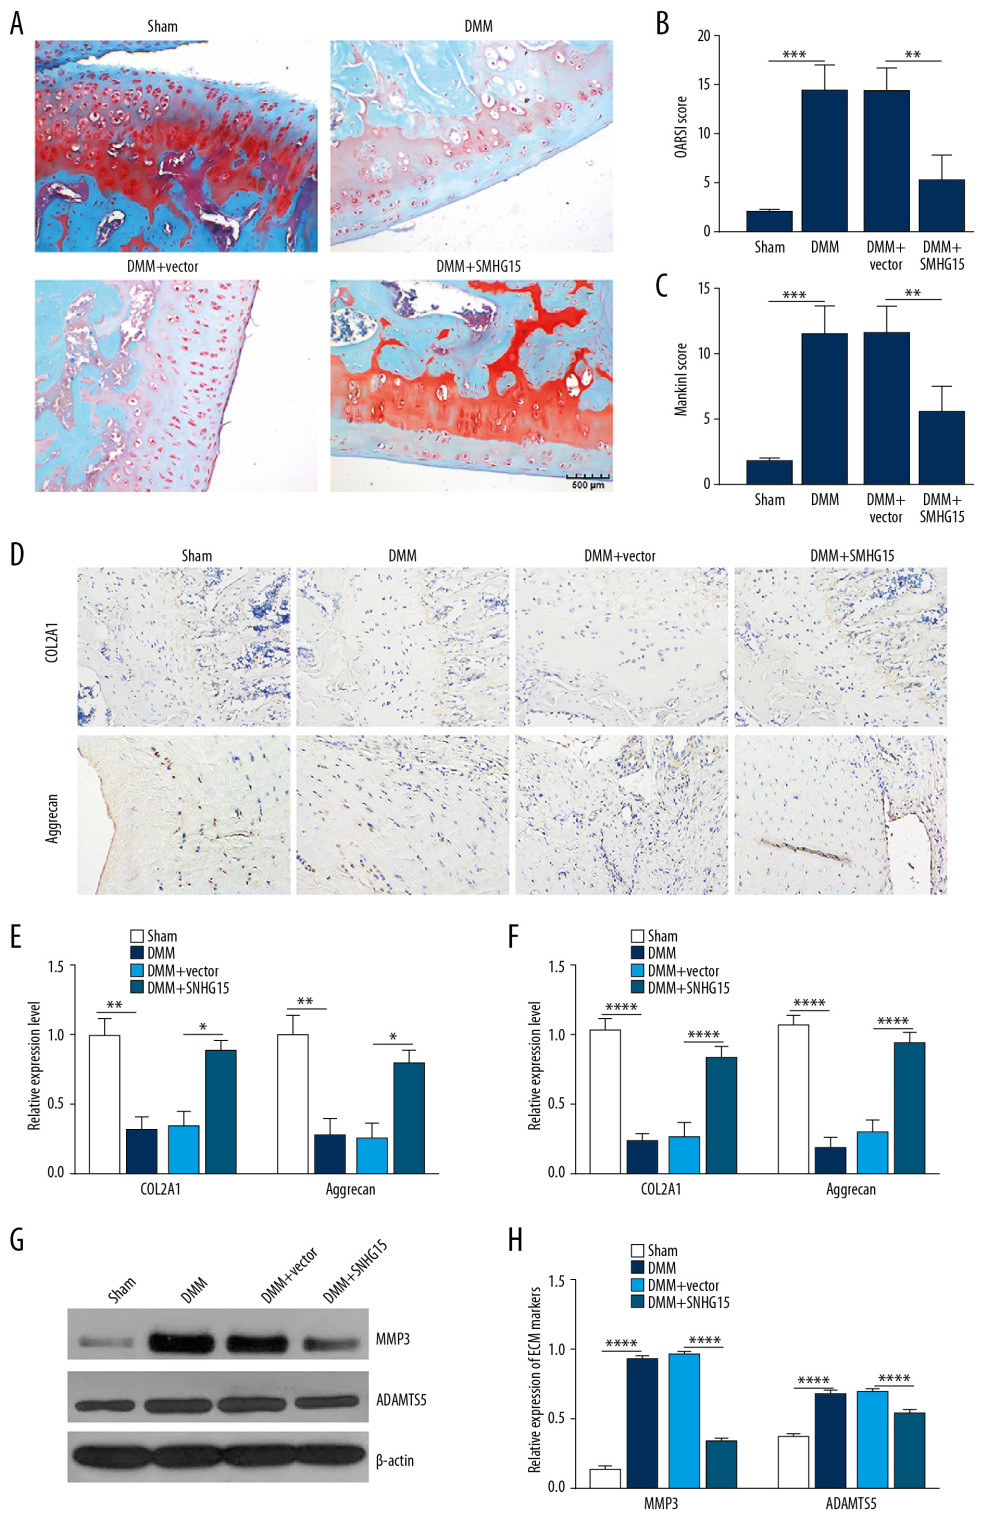 SNHG15 overexpression inhibited ECM degradation and promoted chondrocyte formation in an experimental OA model. (A) The morphology changes of cartilage tissues in the experimental OA model injected by SMHG15 overexpression using Safranin-O and fast green staining. (B, C) Cartilage destruction was assessed according to the OARSI and Mankin scores. (D) Representative images of immunohistochemistry of COL2A1 and Aggrecan in cartilage tissues of the experimental OA model injected by SMHG15 overexpression. Scale bar: 50 μm. Magnification: 200×. (E) Quantitative results of immunohistochemistry for COL2A1 and Aggrecan. (F) COL2A1 and Aggrecan expression in cartilage tissues of experimental OA model injected by SMHG15 overexpression using qRT-PCR. (G, H) MMP3 and ADAMTS5 expression in cartilage tissues of experimental OA model injected by SMHG15 overexpression using western blot. * p<0.05; ** p<0.01, *** p<0.001; **** p<0.0001.